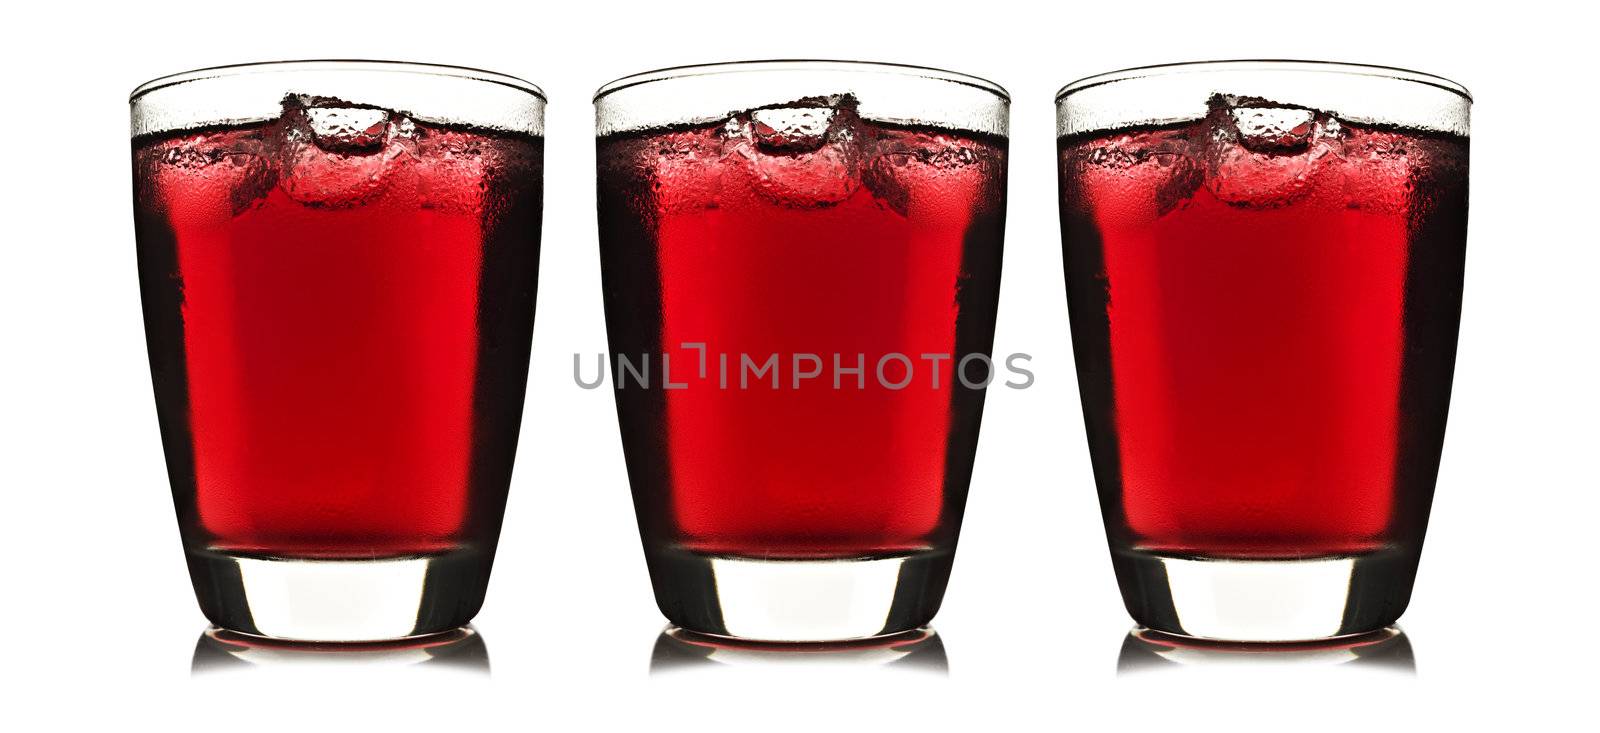 One glass of red fruit juice with ice by tish1